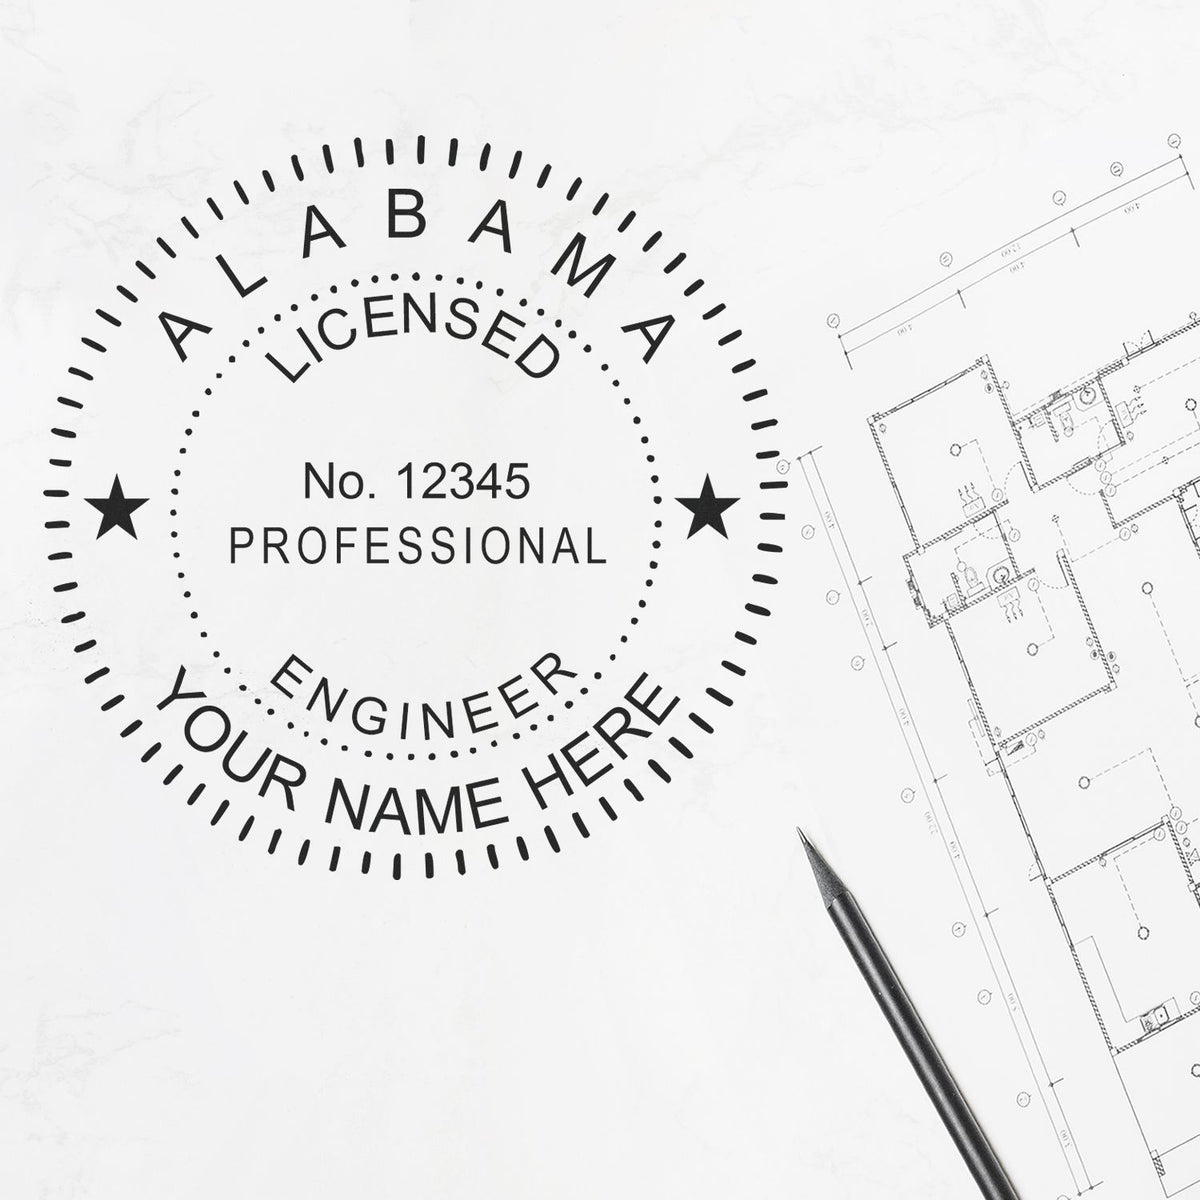 A stamped impression of the Premium MaxLight Pre-Inked Alabama Engineering Stamp in this stylish lifestyle photo, setting the tone for a unique and personalized product.